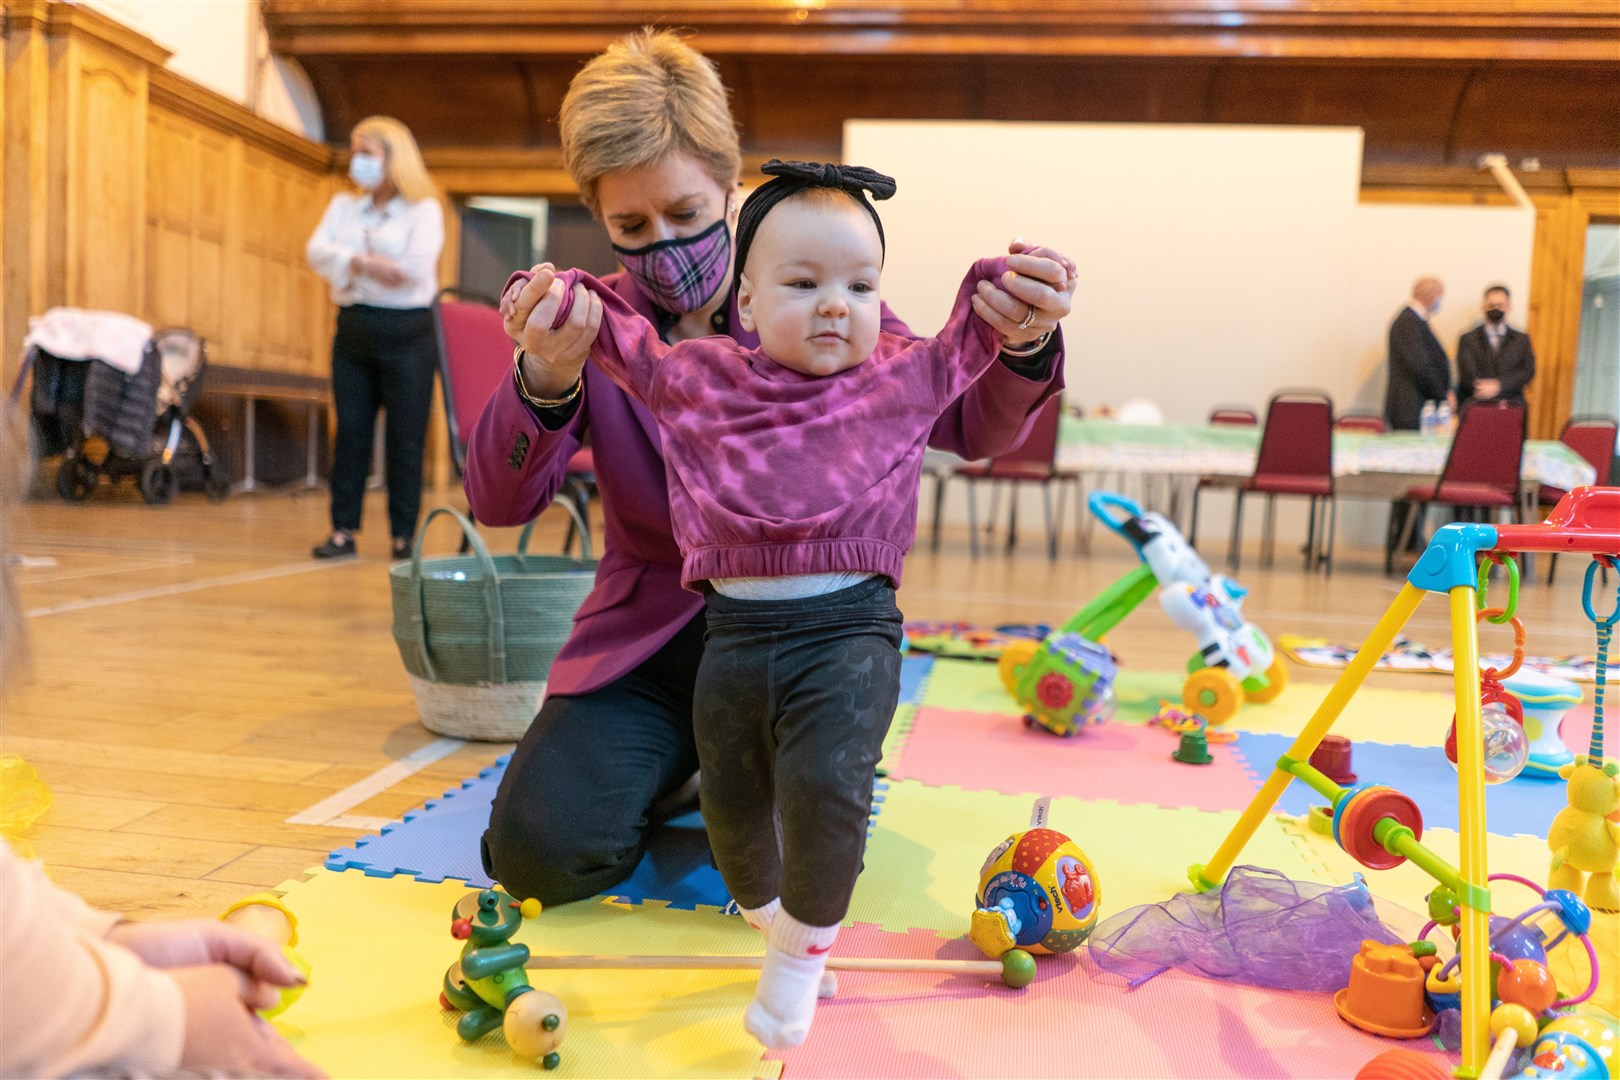 Wearing a tartan mask to play with nine-month-old Amelia Mackinnon during a visit at Govan Help in Glasgow in 2022 (Peter Summers/PA)